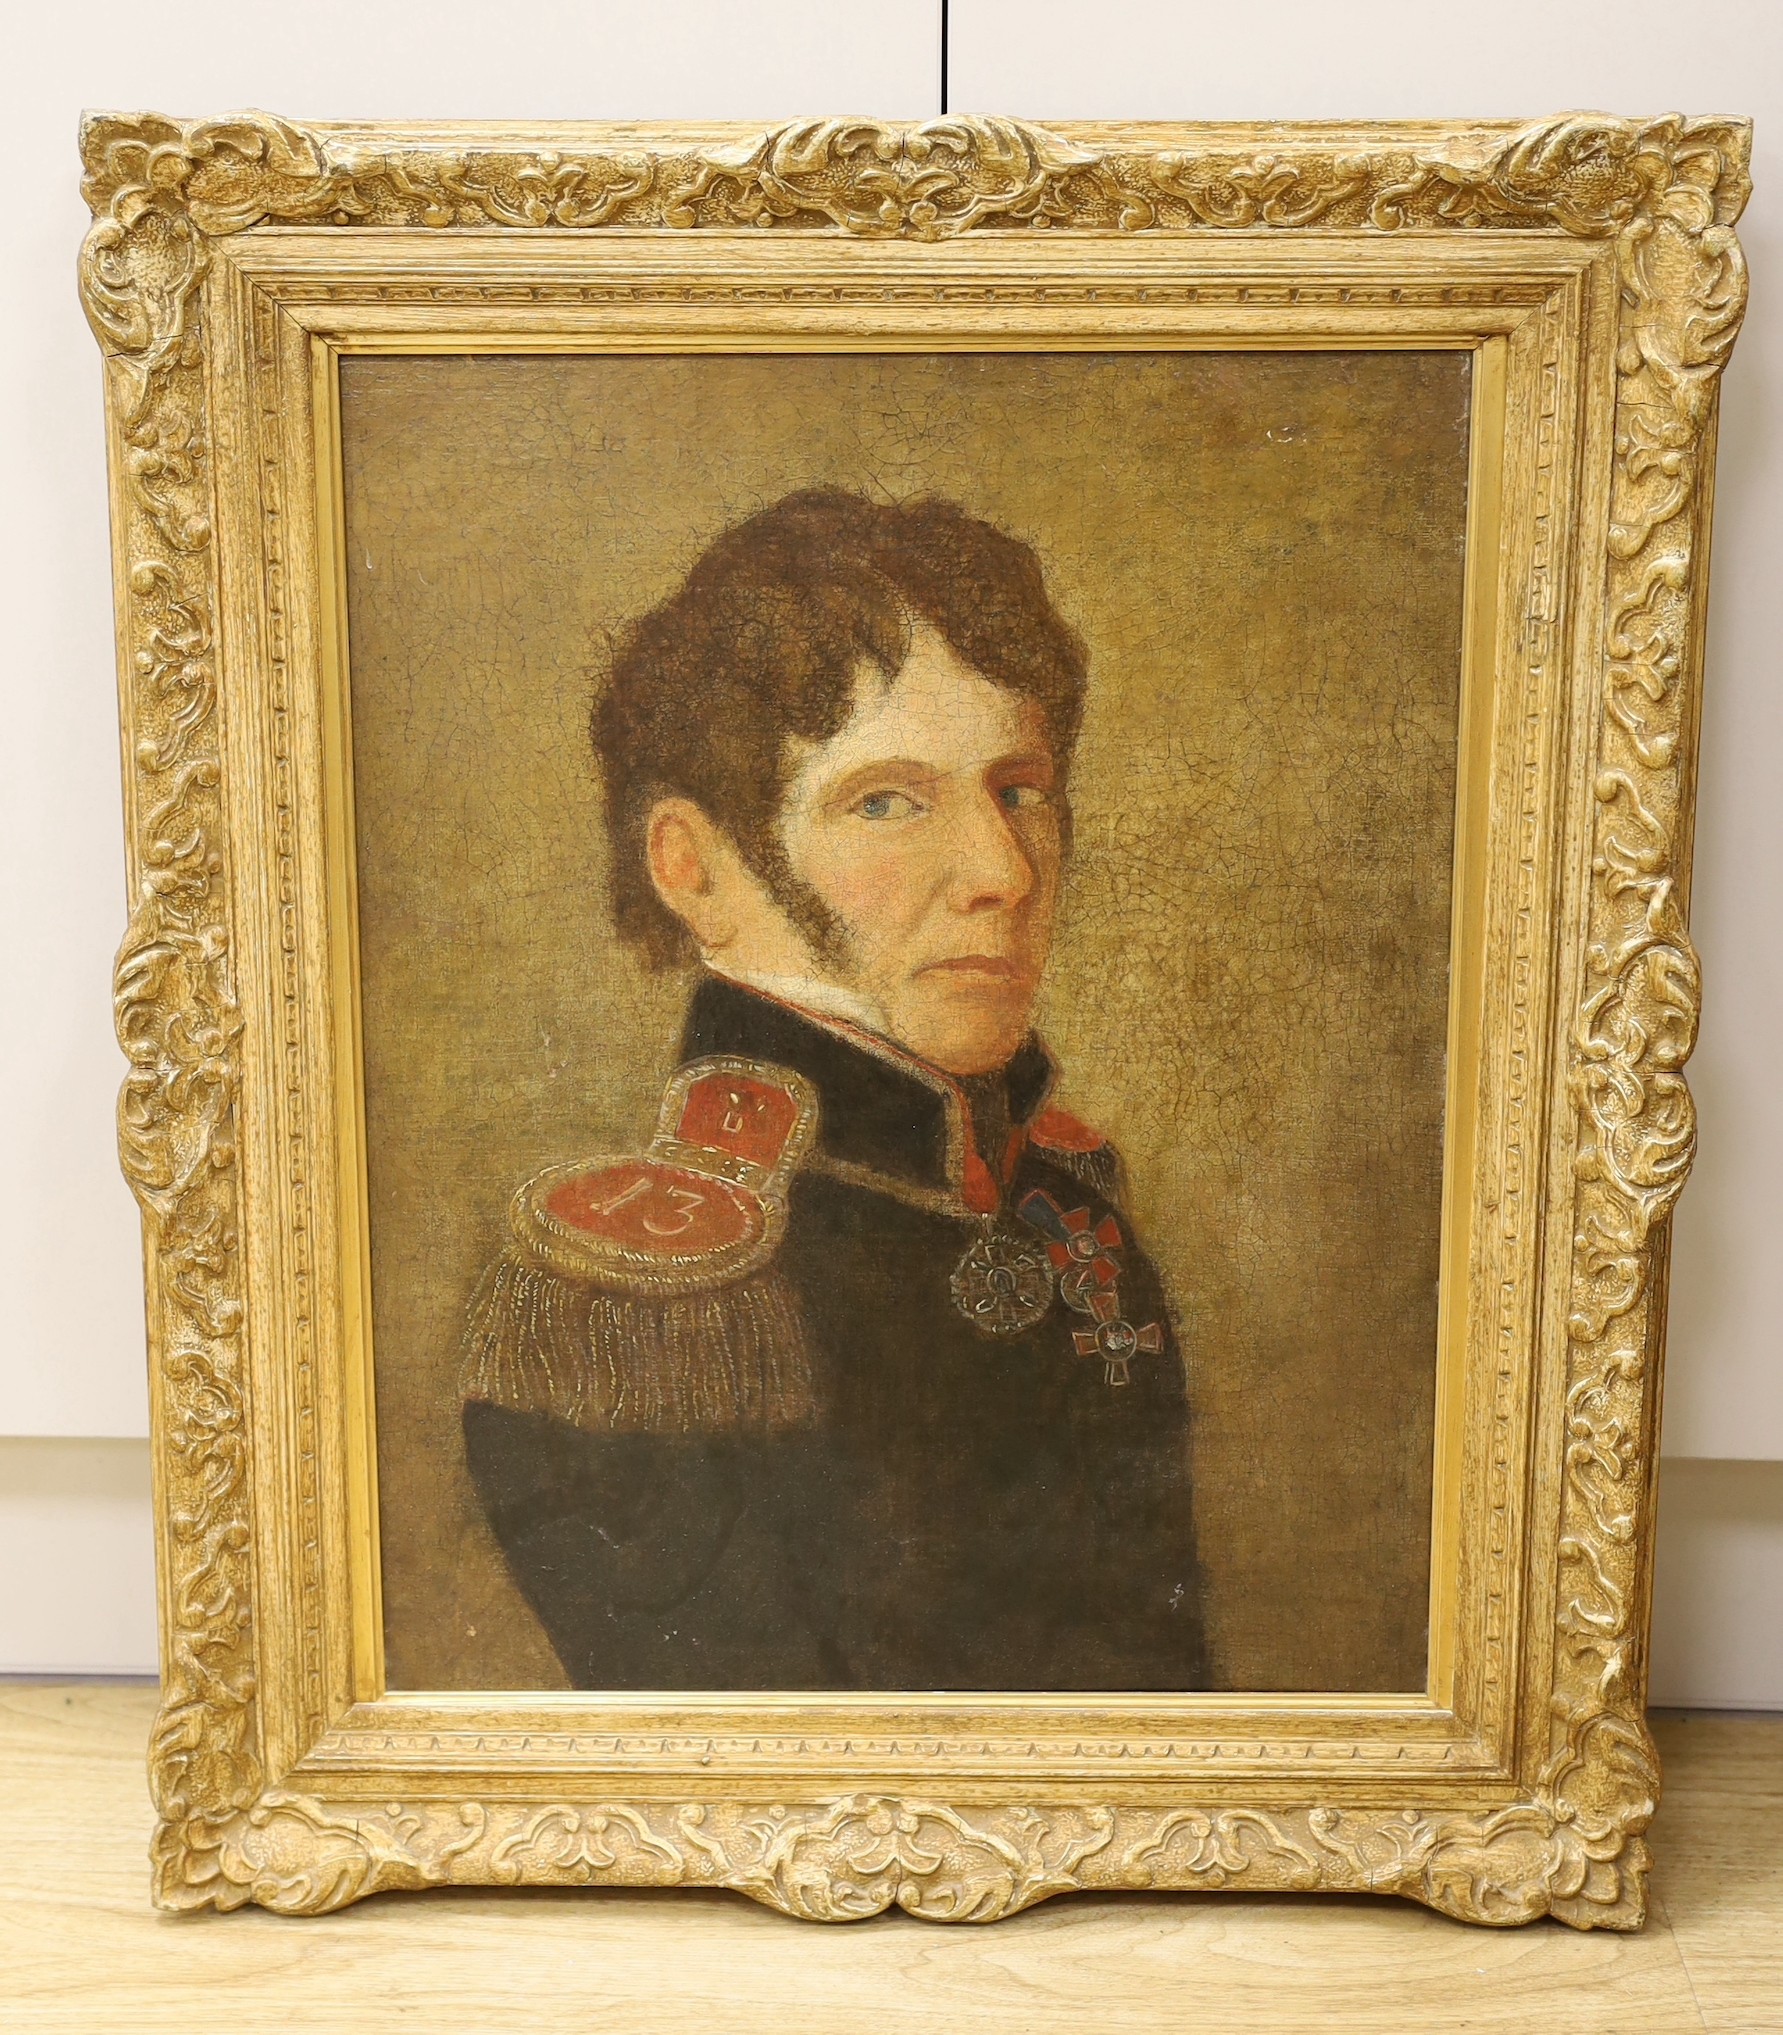 19th century French School, oil on canvas, Portrait of an army officer wearing several - Image 2 of 3